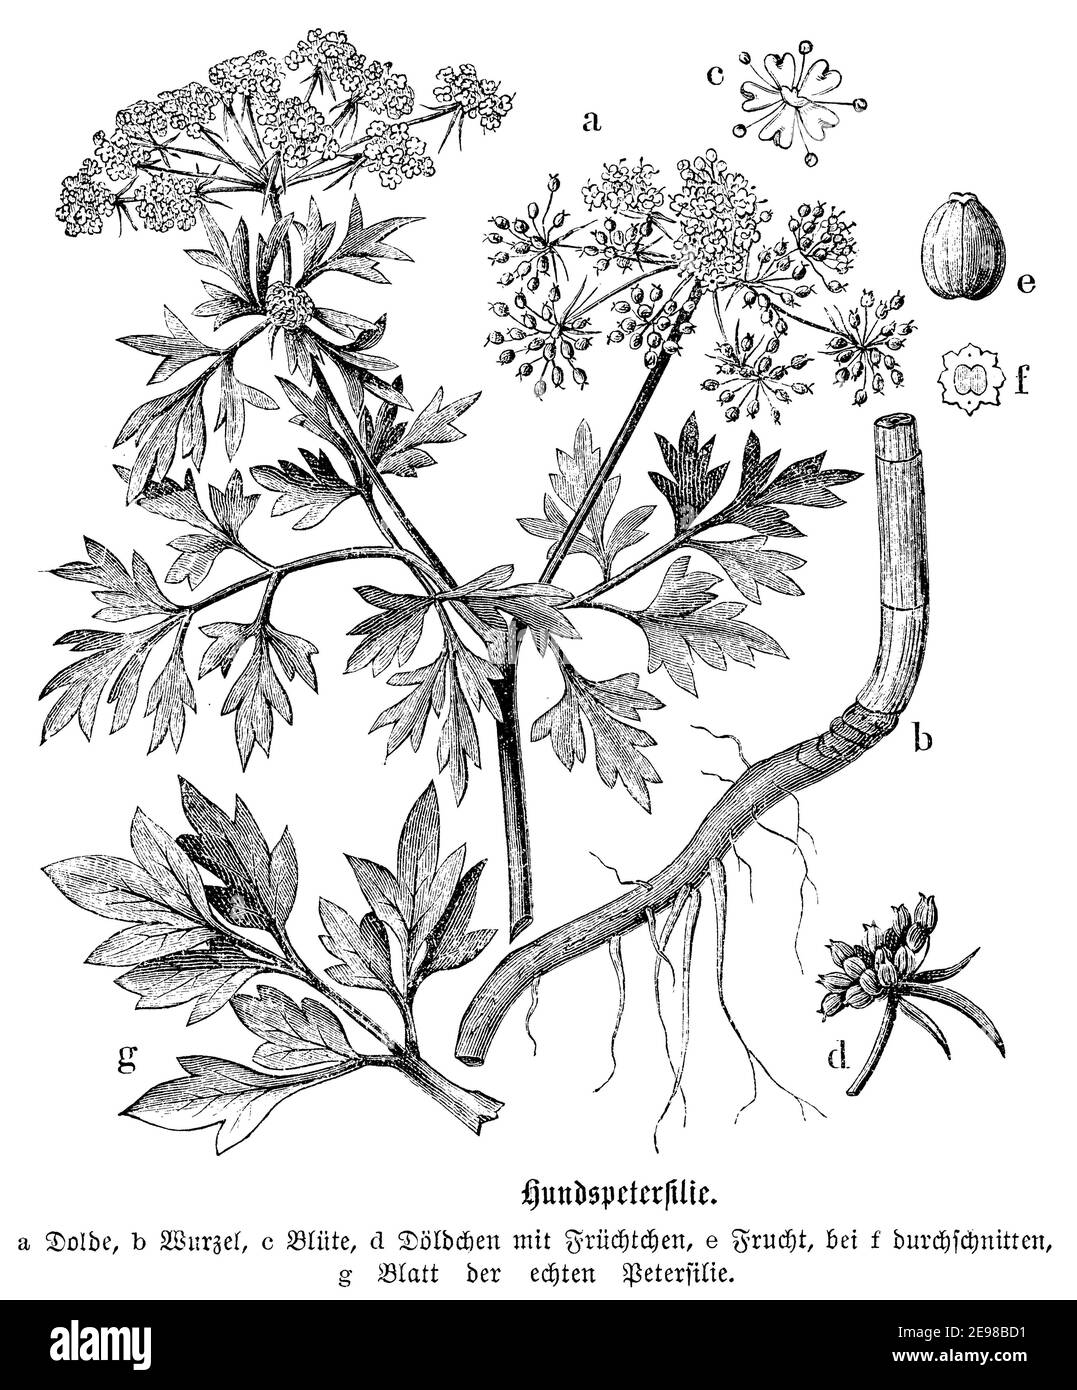 fool's parsley, fool's cicely, or poison parsley / Aethusa cynapium / Hundspetersilie (botany book, 1880) Stock Photo